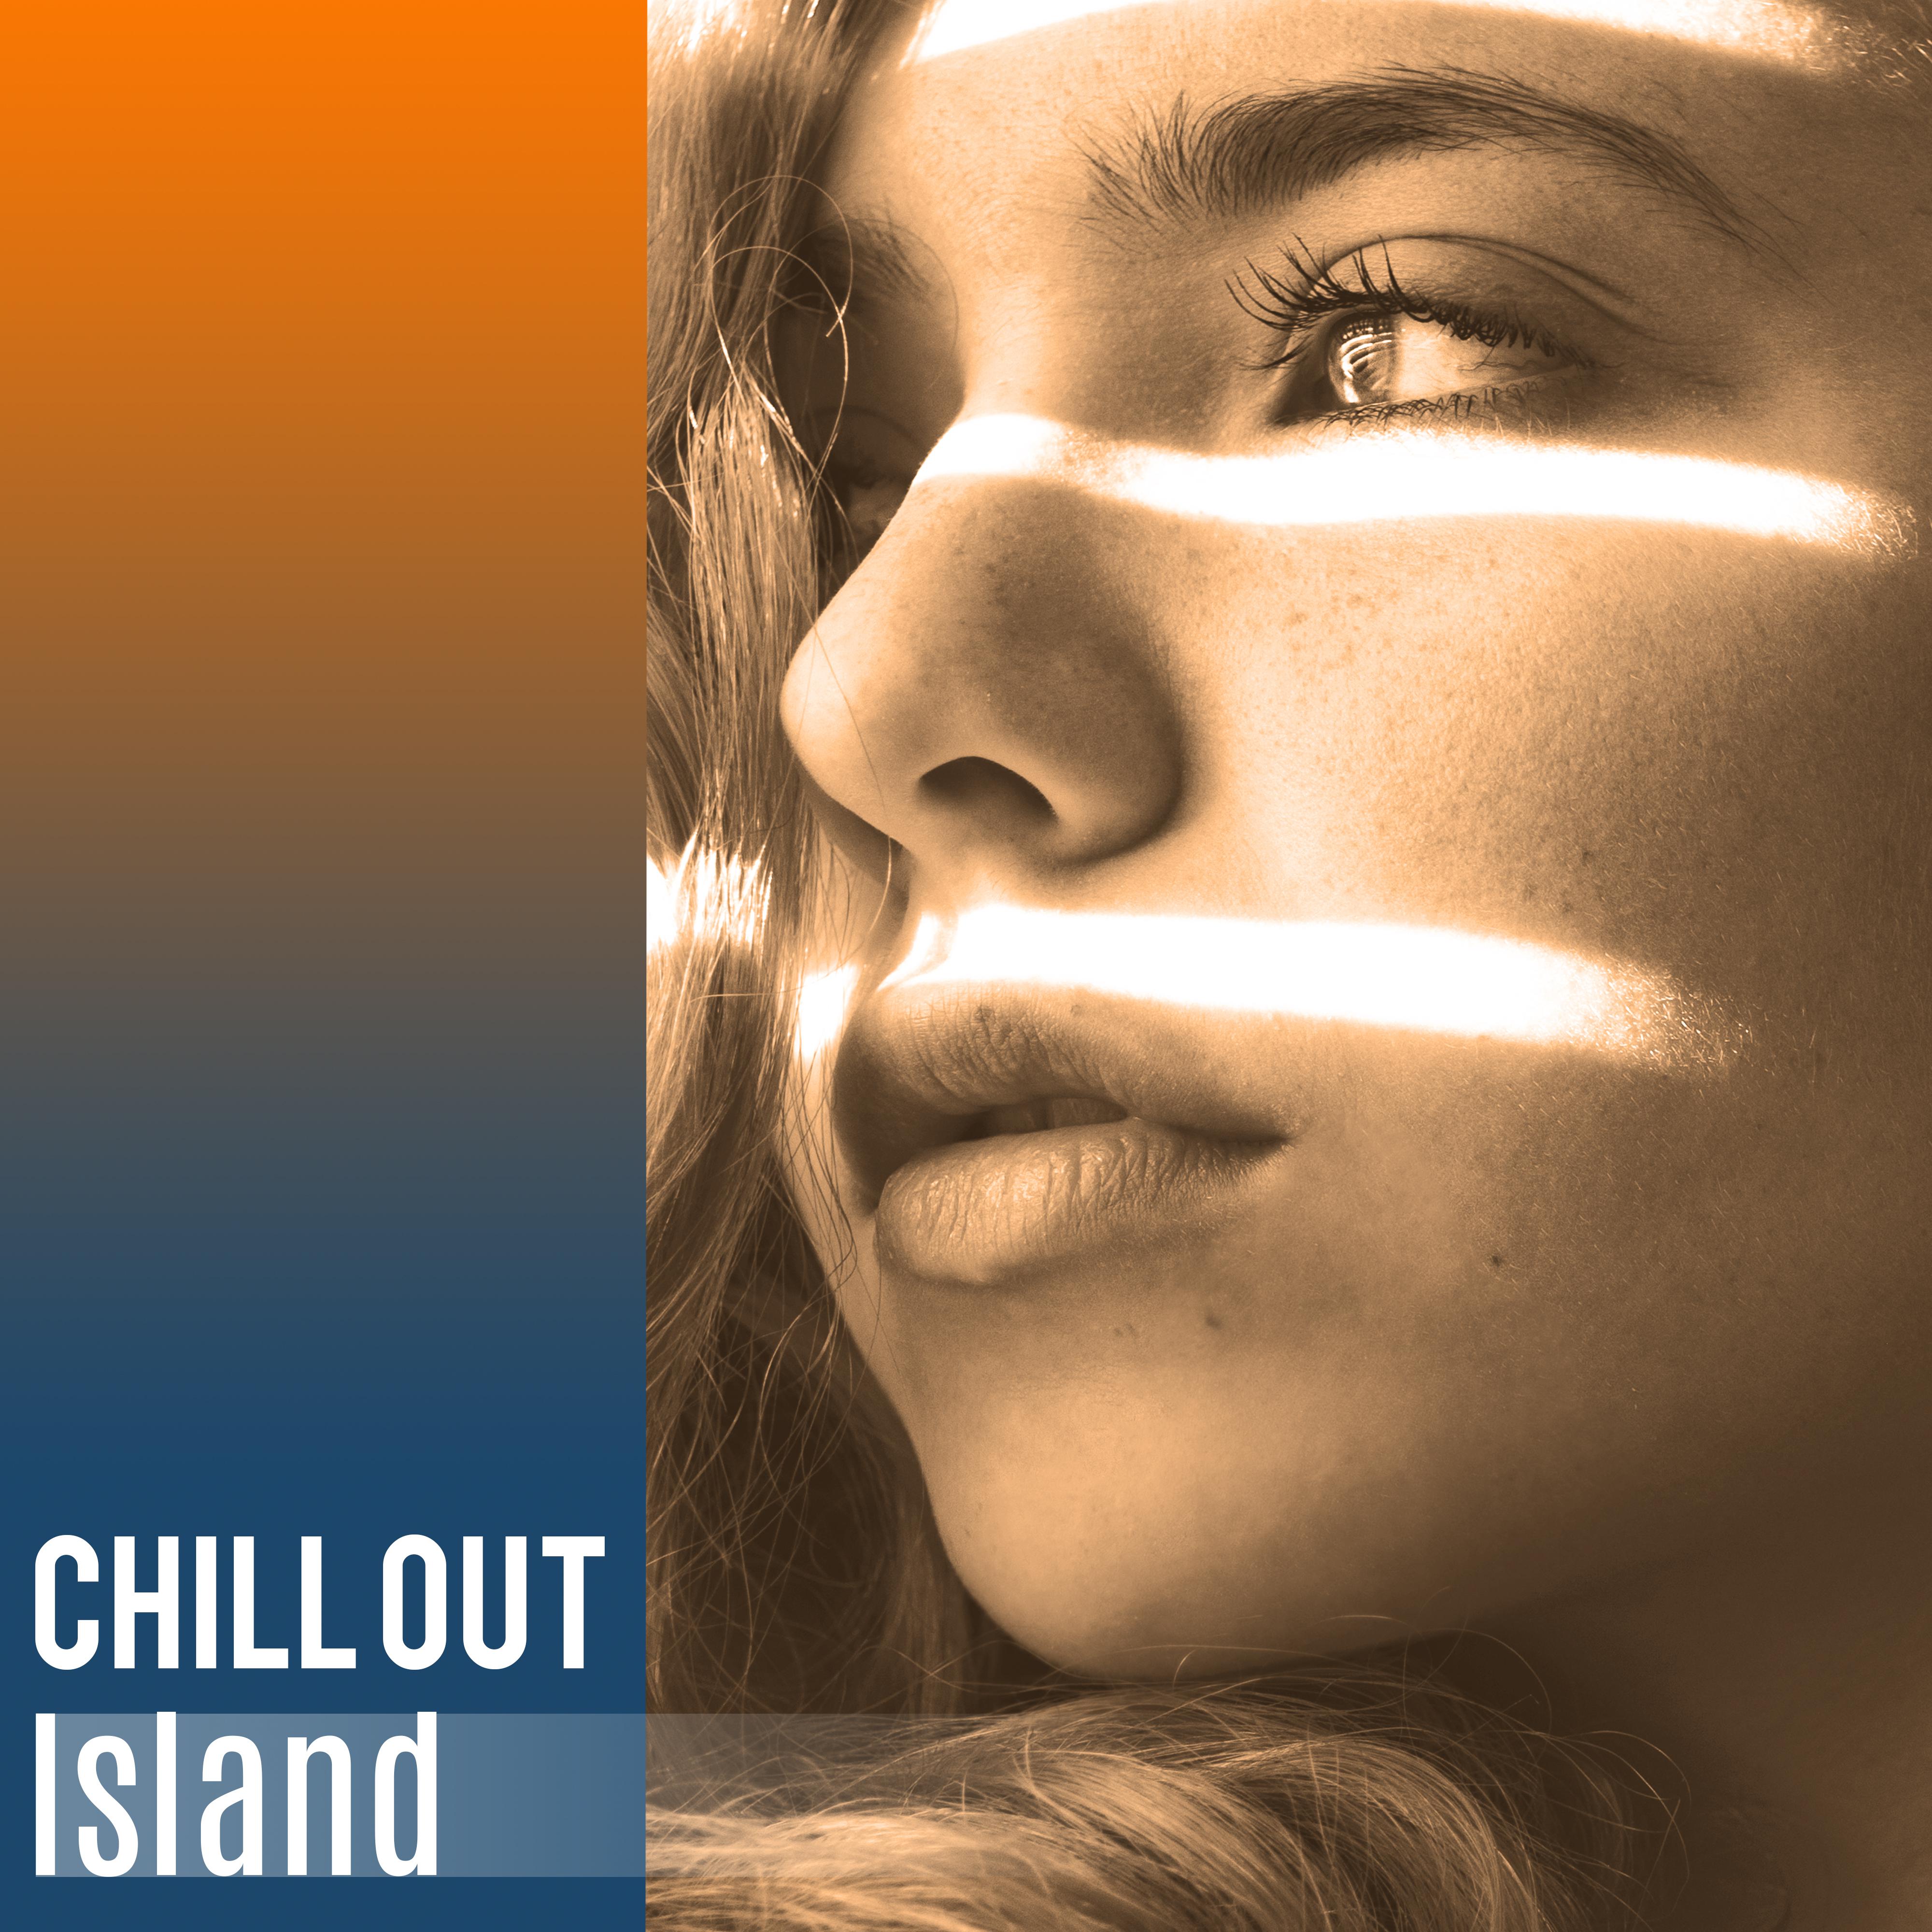 Chillout Island – Deep Chill Out Music, Summer Music, Just Relax, Chillout Party, Electronic Music